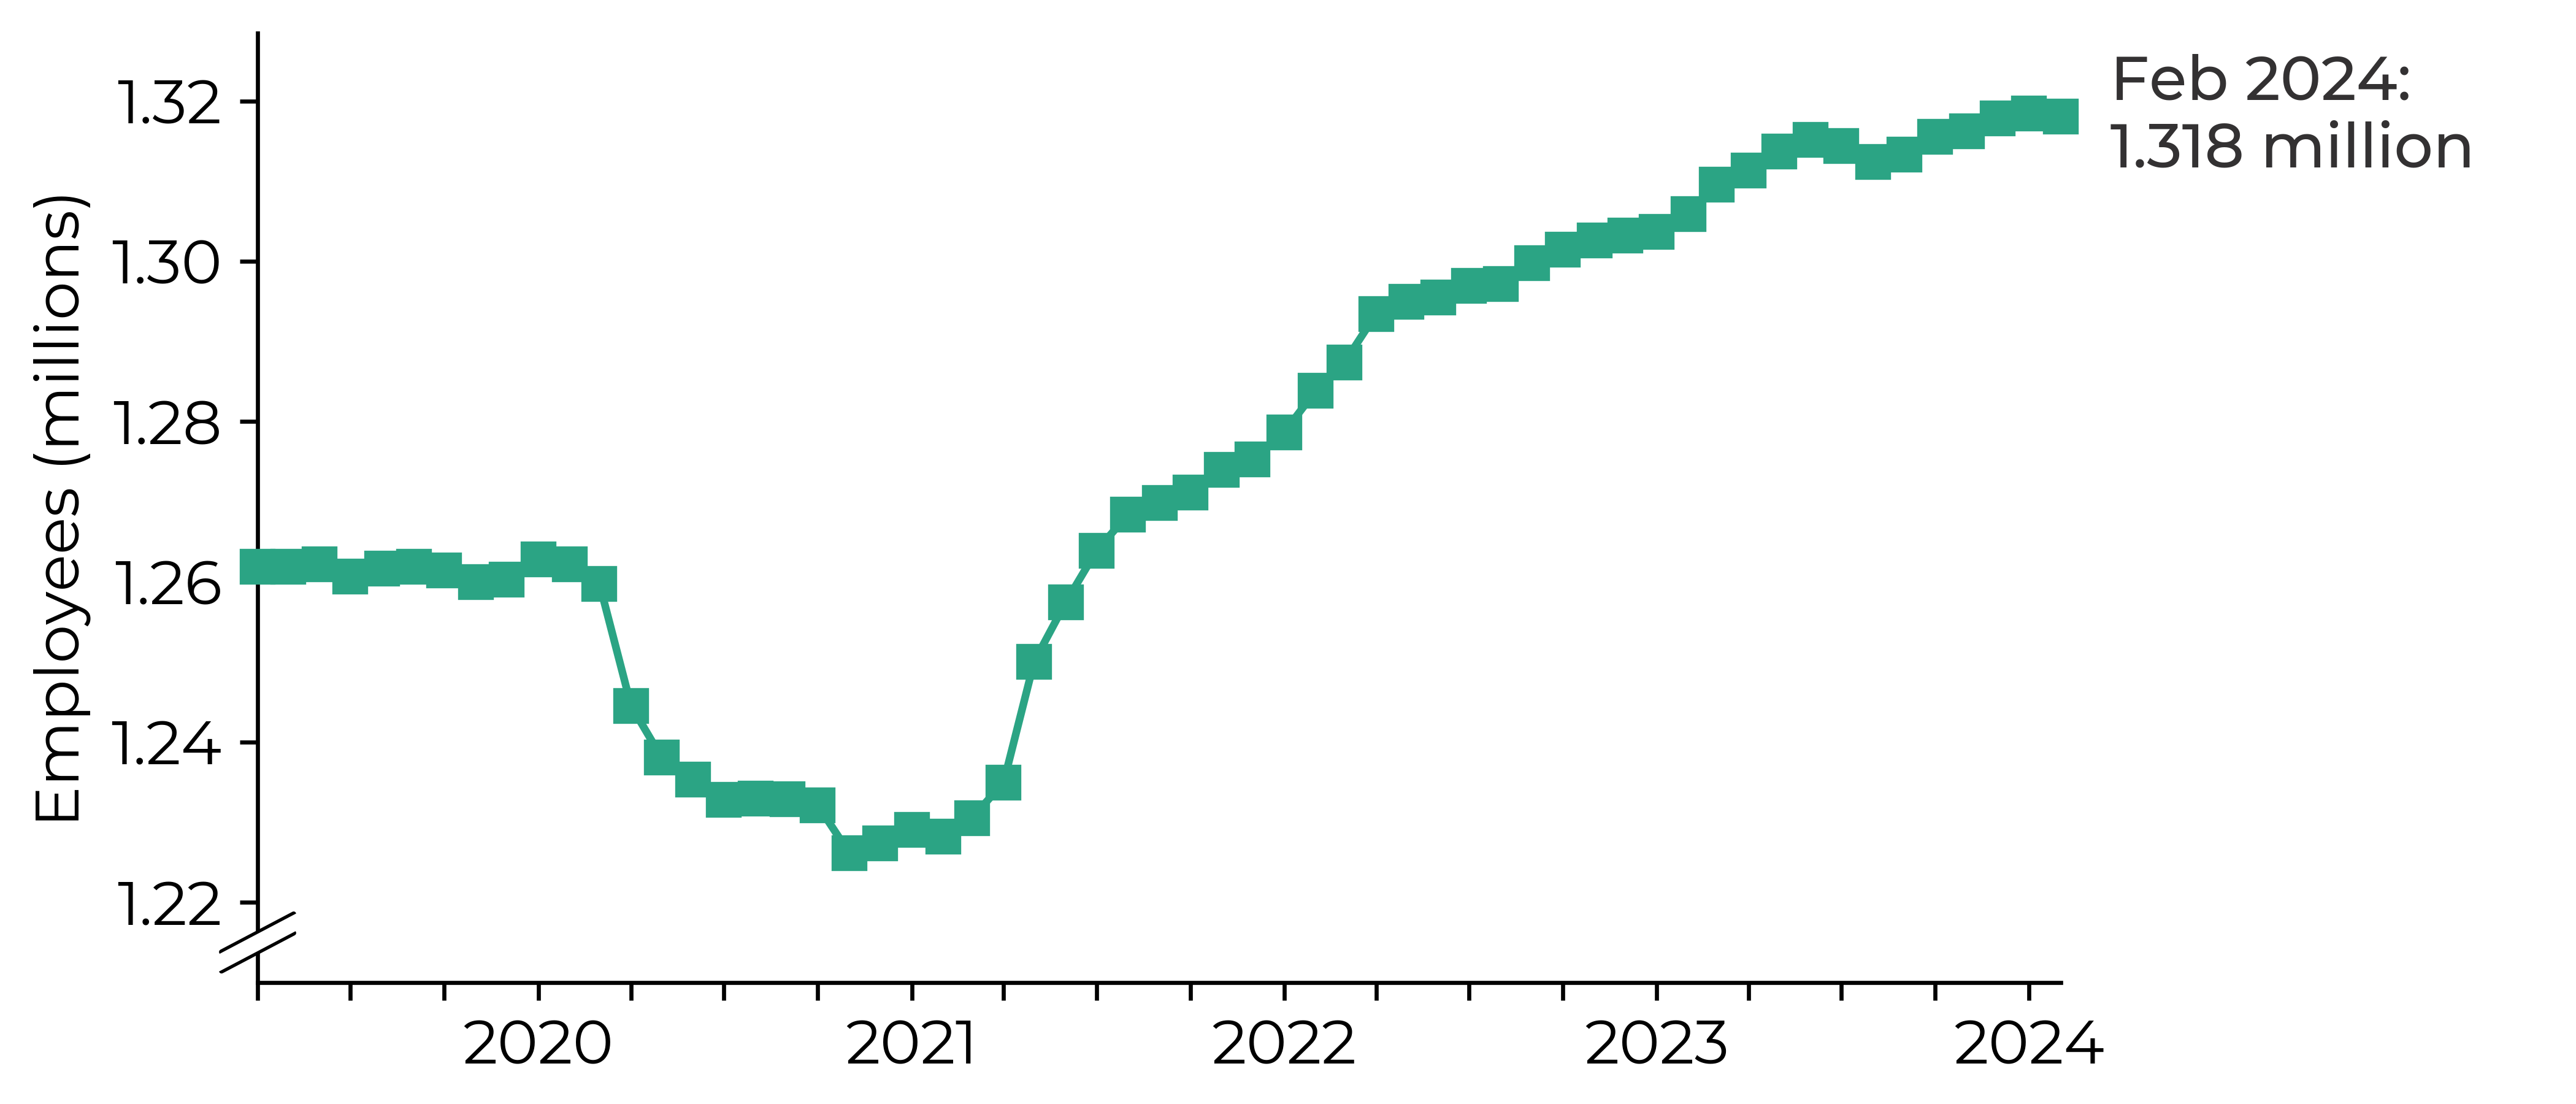 Graph showing a large dip in payrolled employees during the period March 2020 to March 2021 to under 1.23 million. This was followed by an increase to 1.318 million by February 2024.